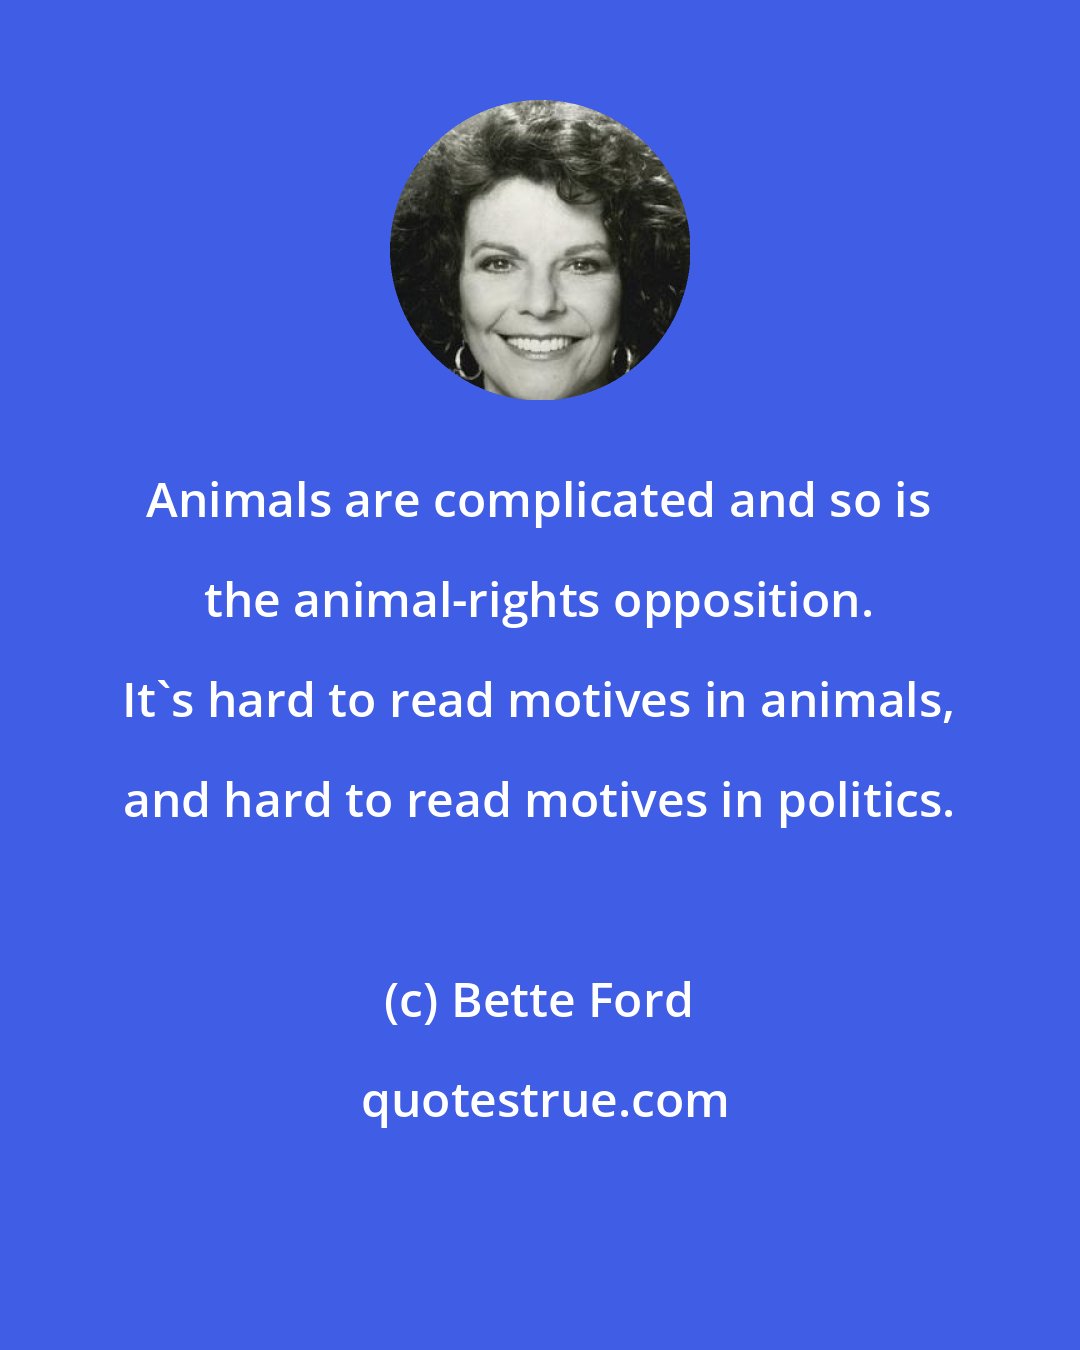 Bette Ford: Animals are complicated and so is the animal-rights opposition. It's hard to read motives in animals, and hard to read motives in politics.